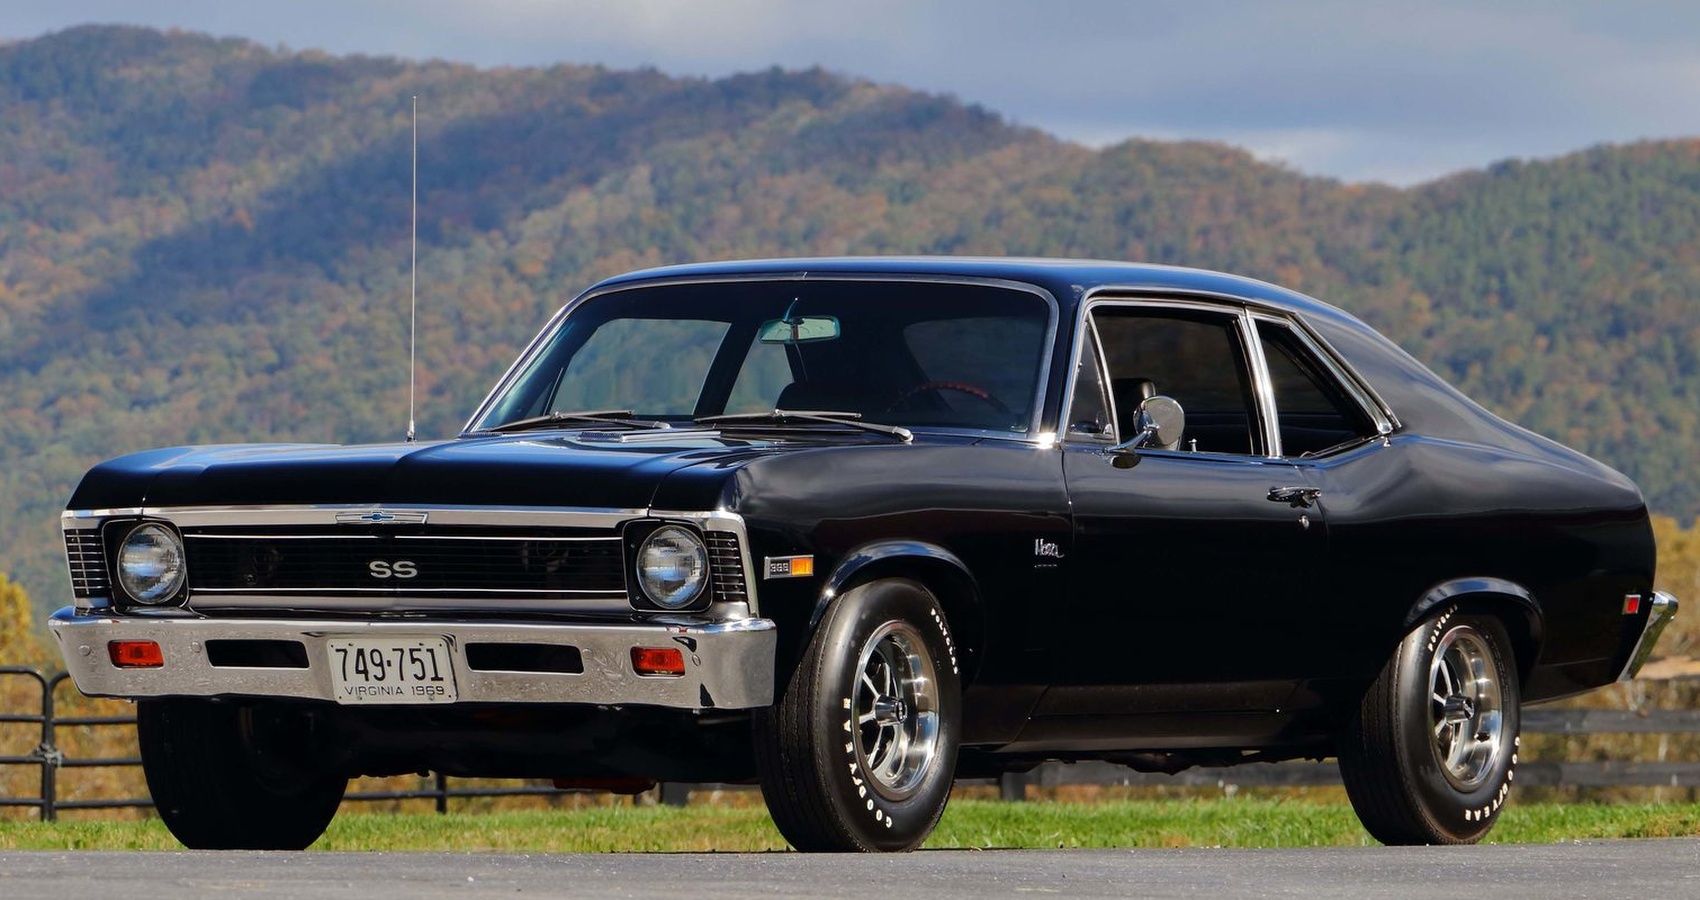 1969 Chevrolet Nova SS FEATURED IMAGE Cropped